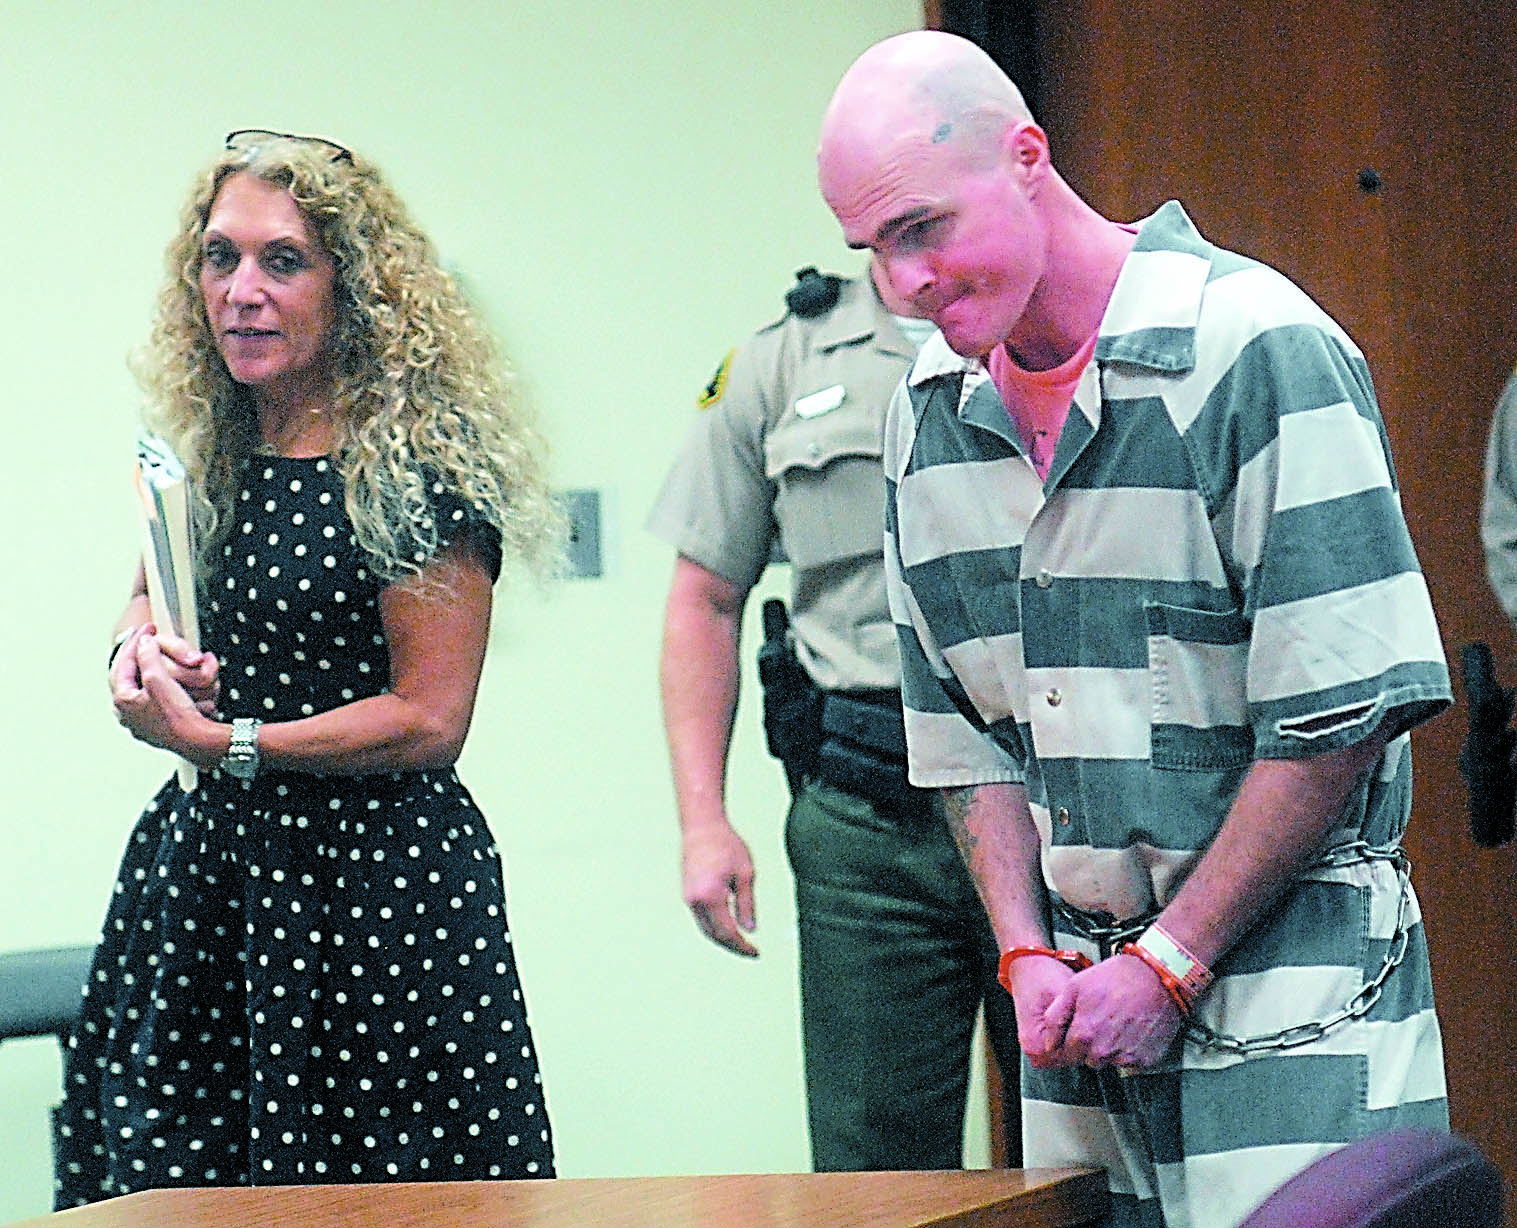 Richard Drum enters Clallam County Superior Court with court-appointed attorney Karen Unger on Friday. Drum